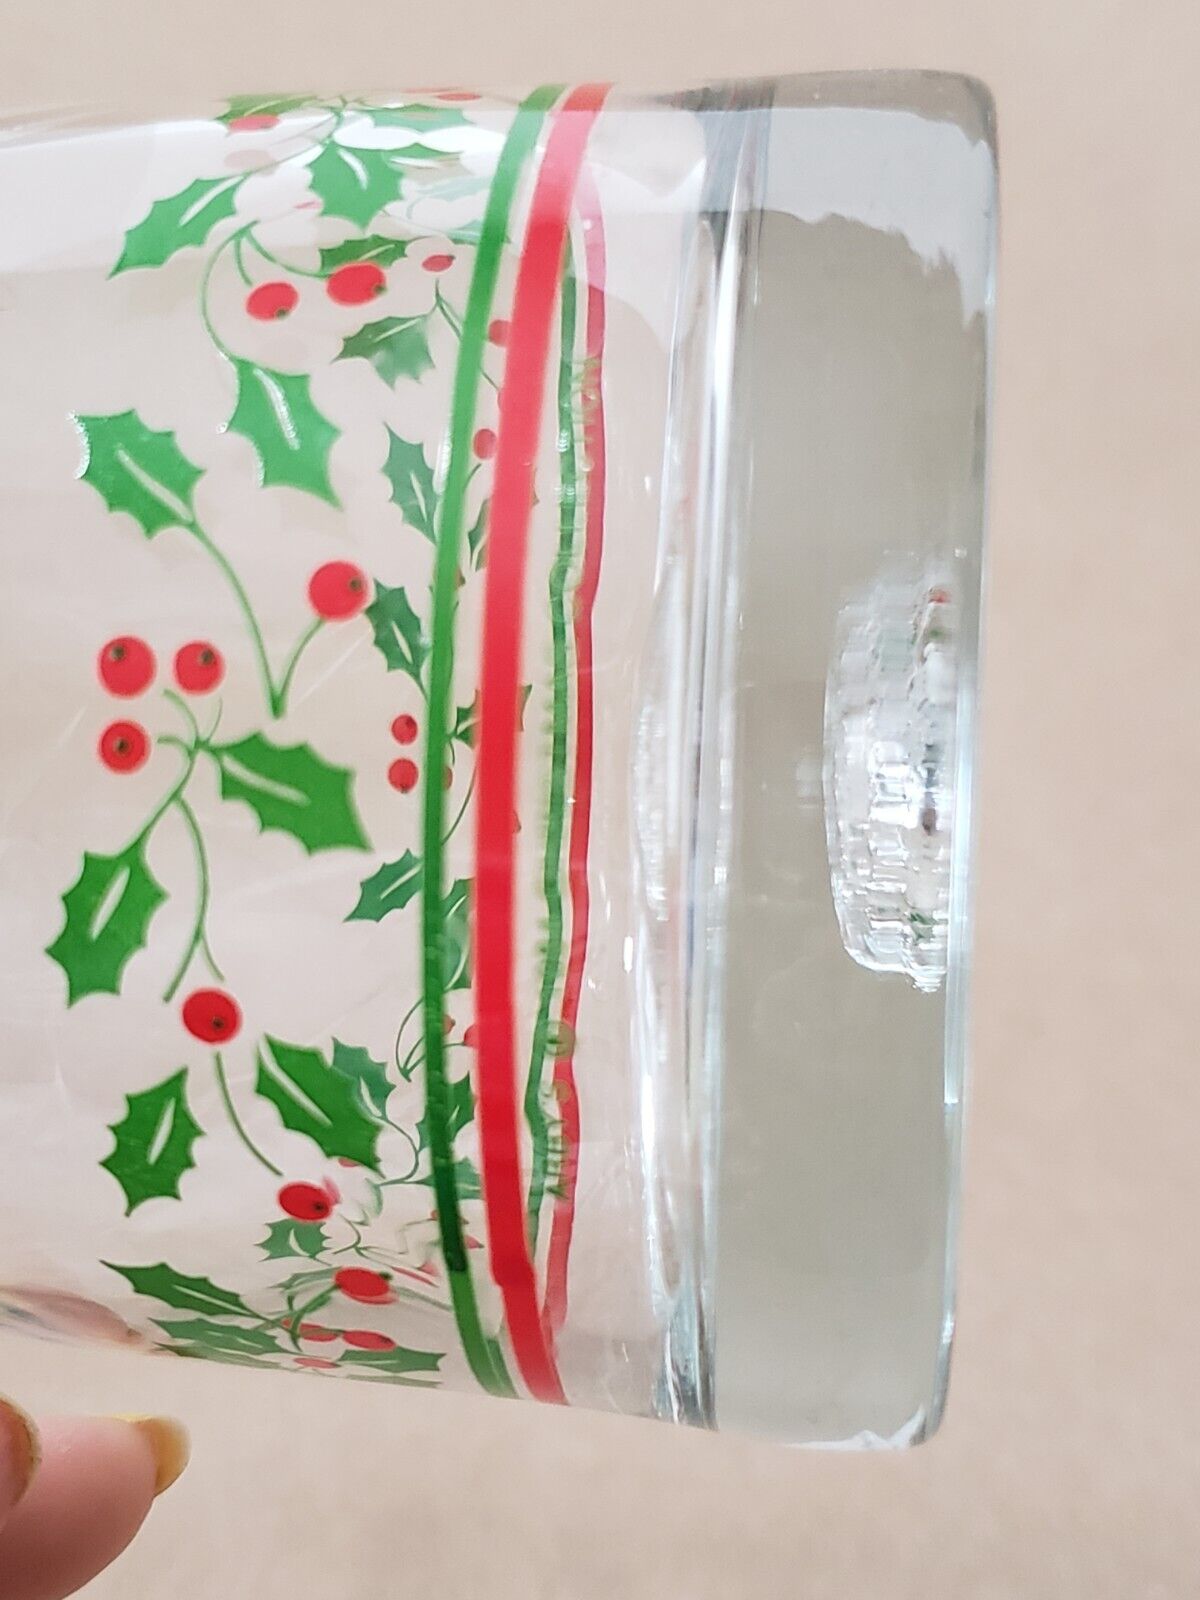 4 Arby's 1983 Christmas Tumbler Glasses by Libbey Holiday Berry Collection USA